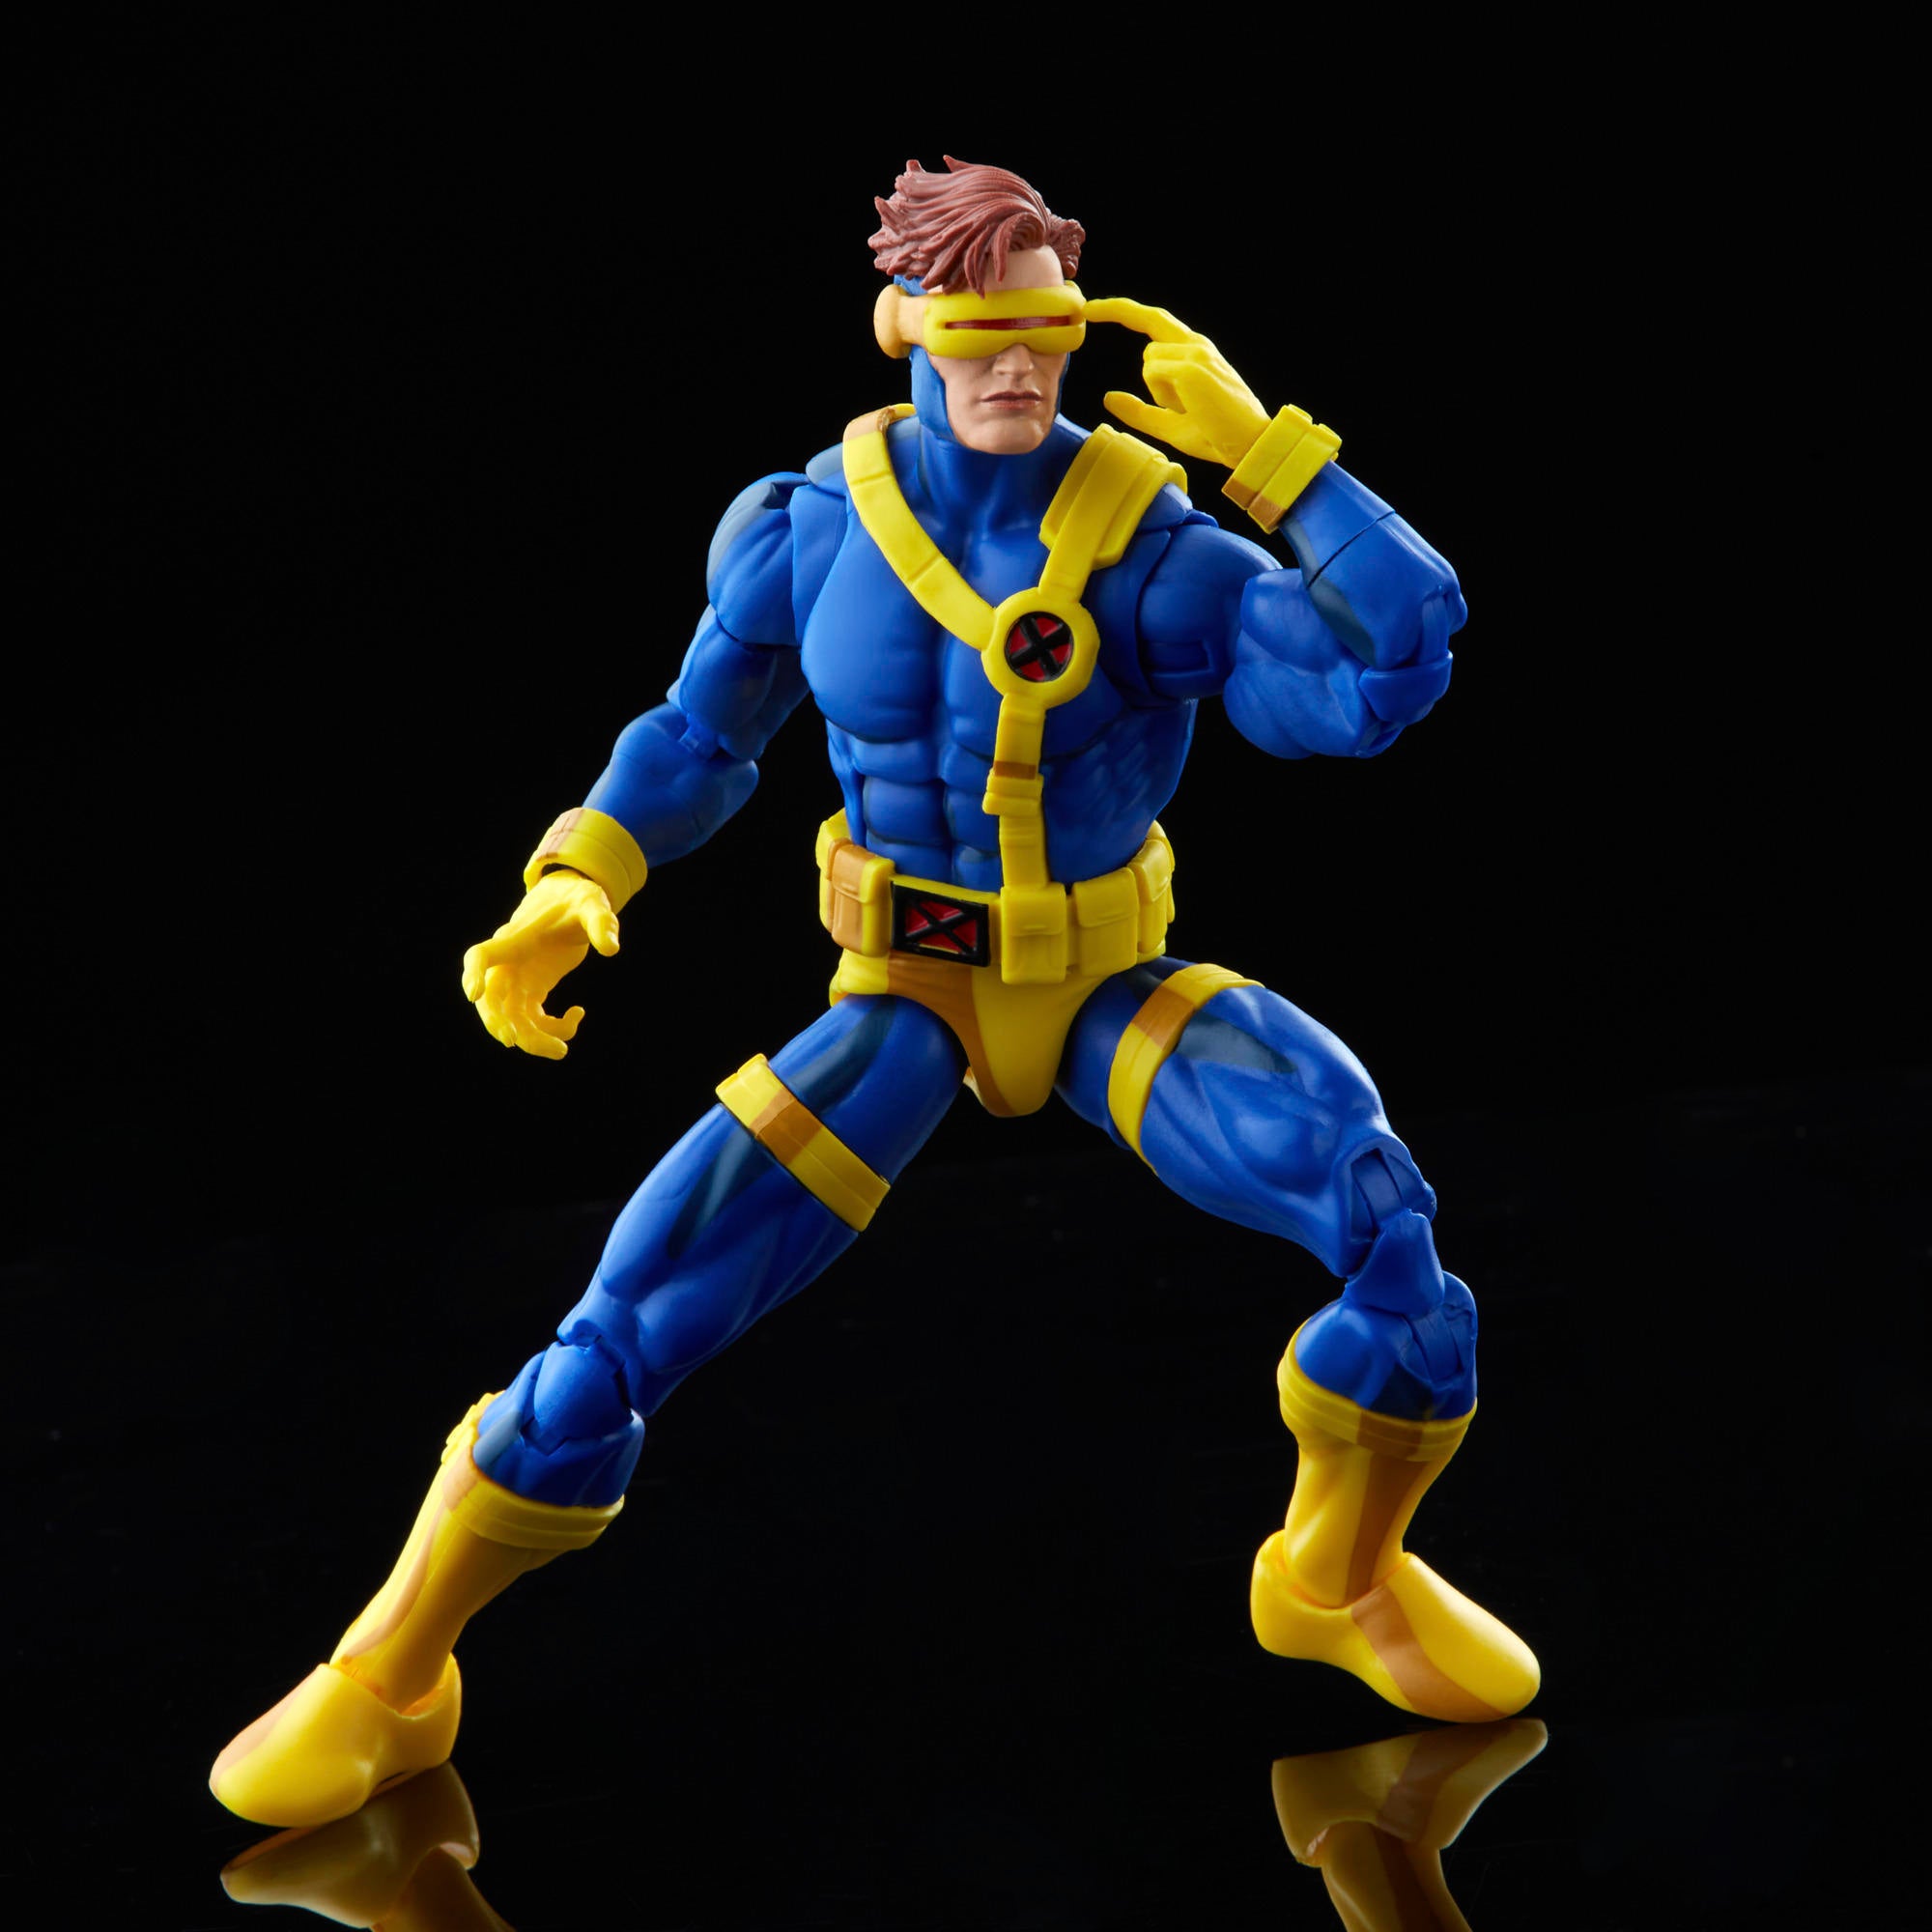 The Animated Series Cyclops VHS Figure Launches at Pulse Con 2022 (Exclusive)